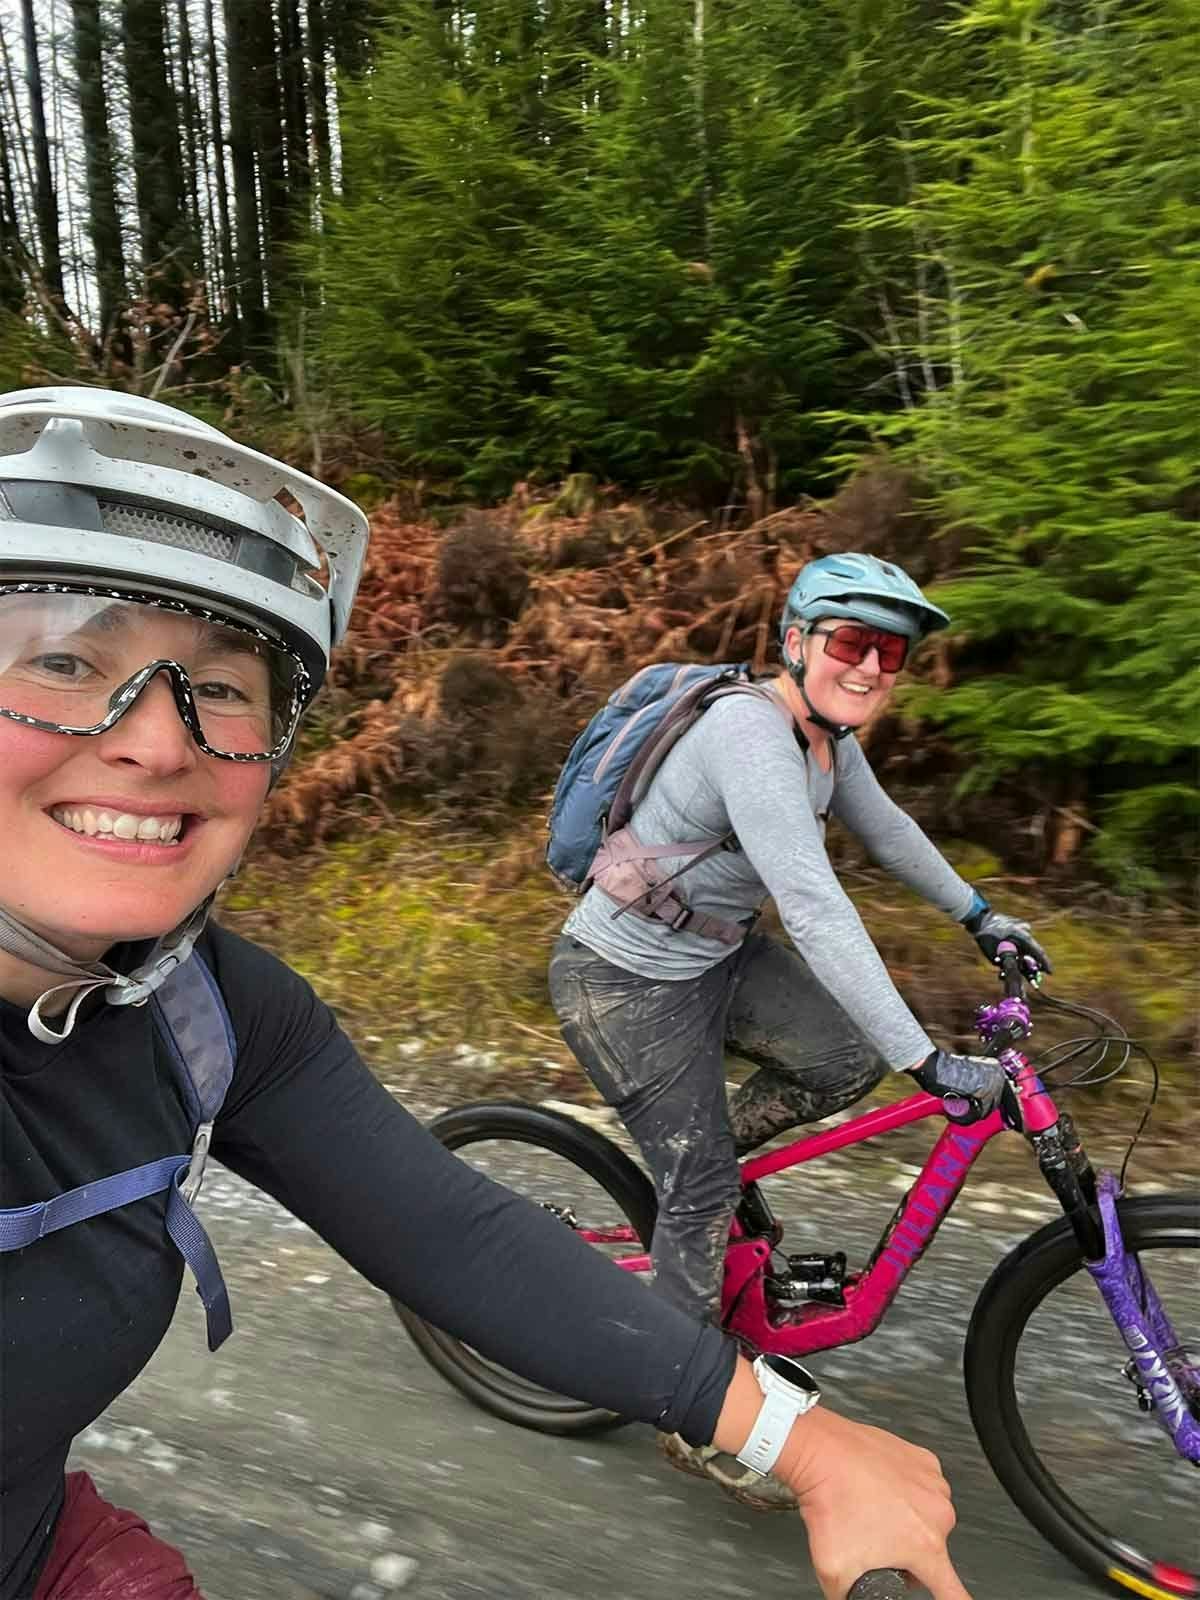 Juliana Bicycles: Leaving a positive trace with Julia Hobson